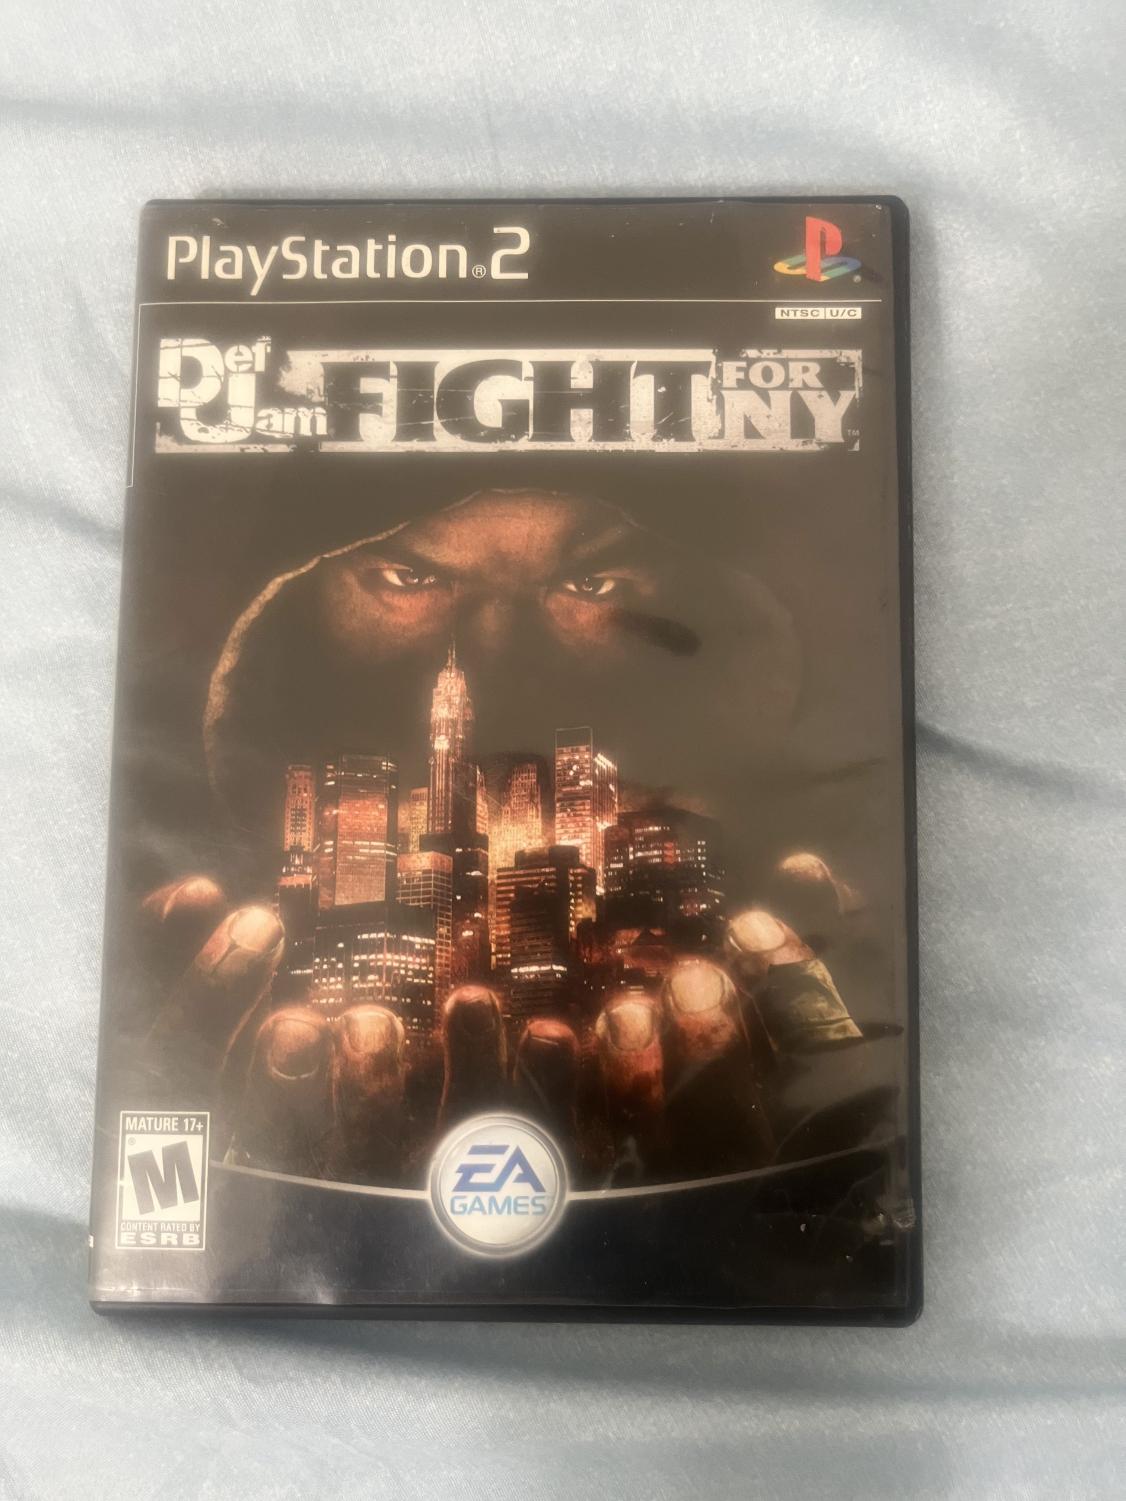 What are the chances of Def Jam Fight For Ny coming to ps4 via ps2  classics? : r/PS4